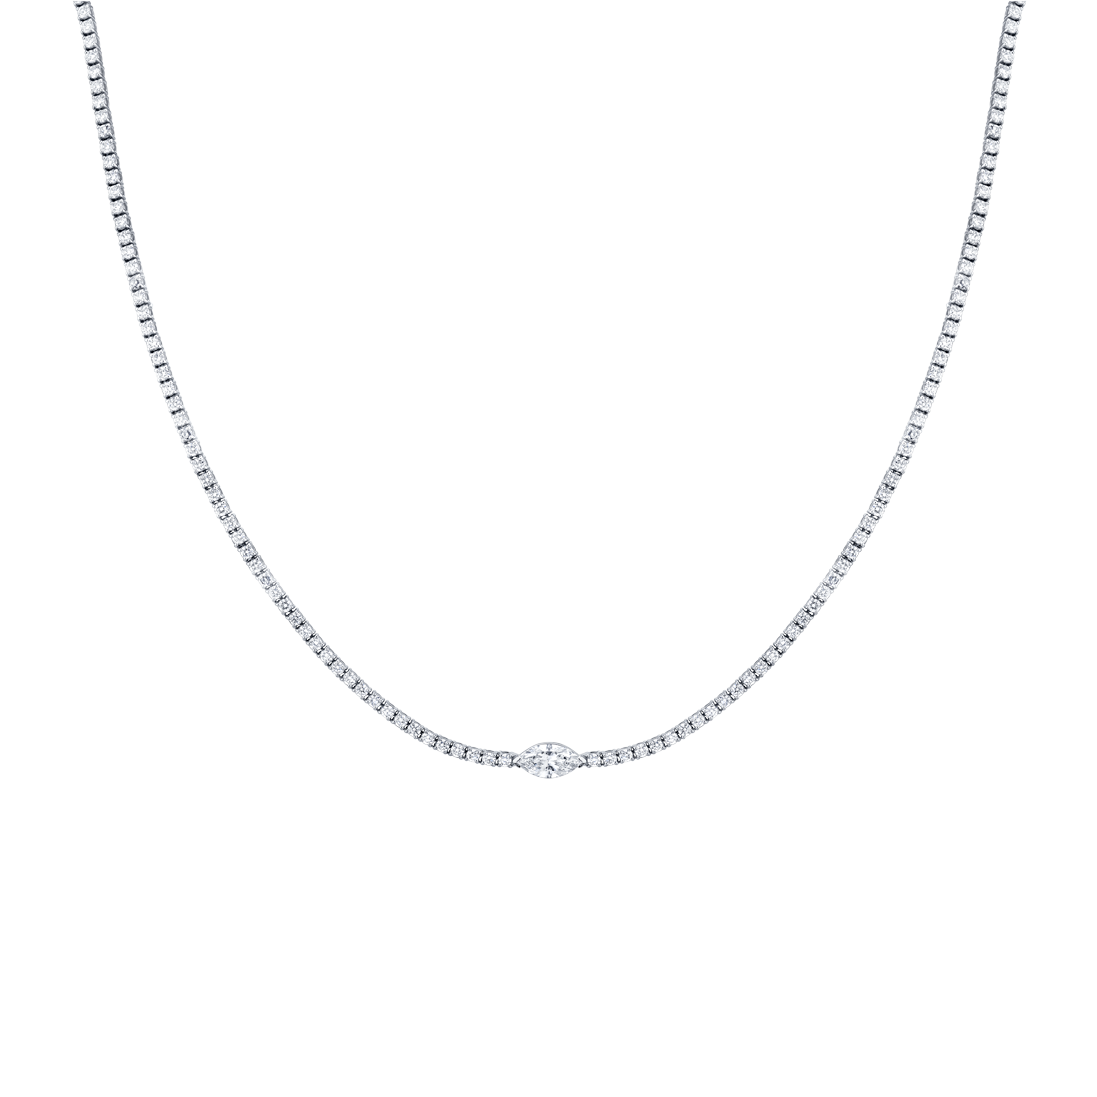 Straightline necklace with a marquise center stone